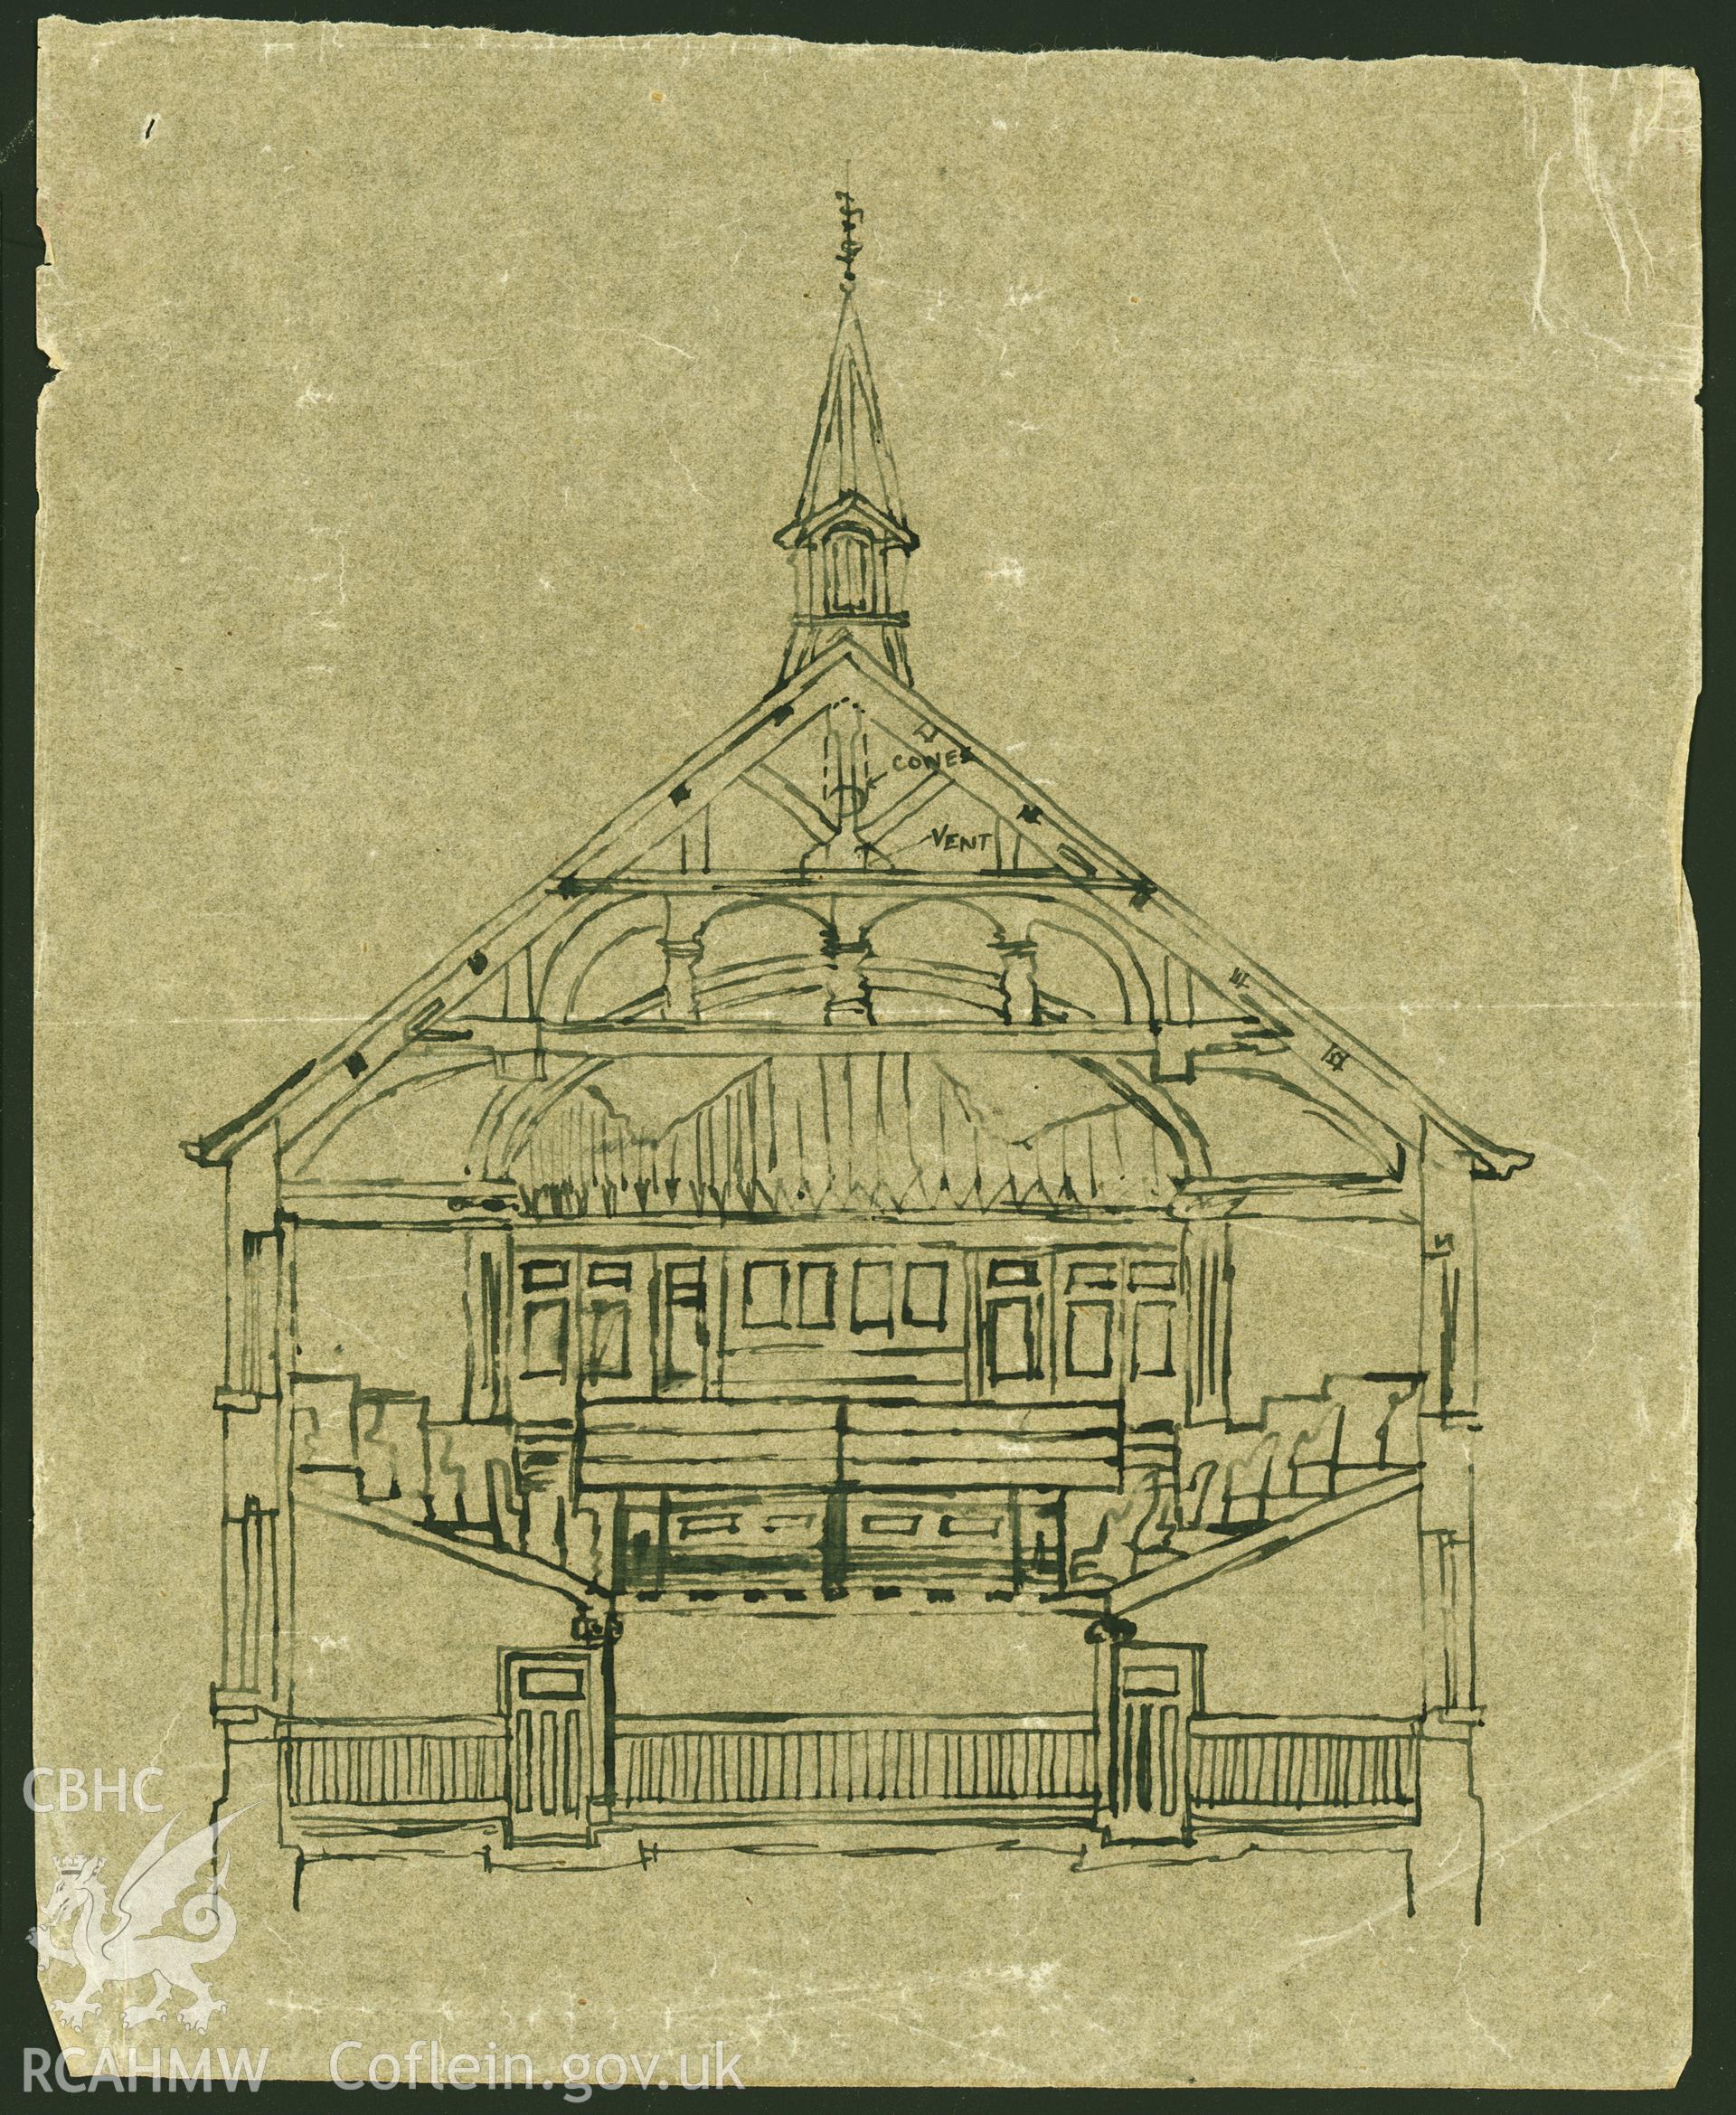 Digitized copy of a pen and ink drawing showing an sectional interior view of Bethania Chapel, Maesteg. Part of a collection of material relating to Bethania Chapel, Maesteg, loaned for copying by the Welsh Religious Buildings Trust. The original collection is held by the Glamorgan Record Office.